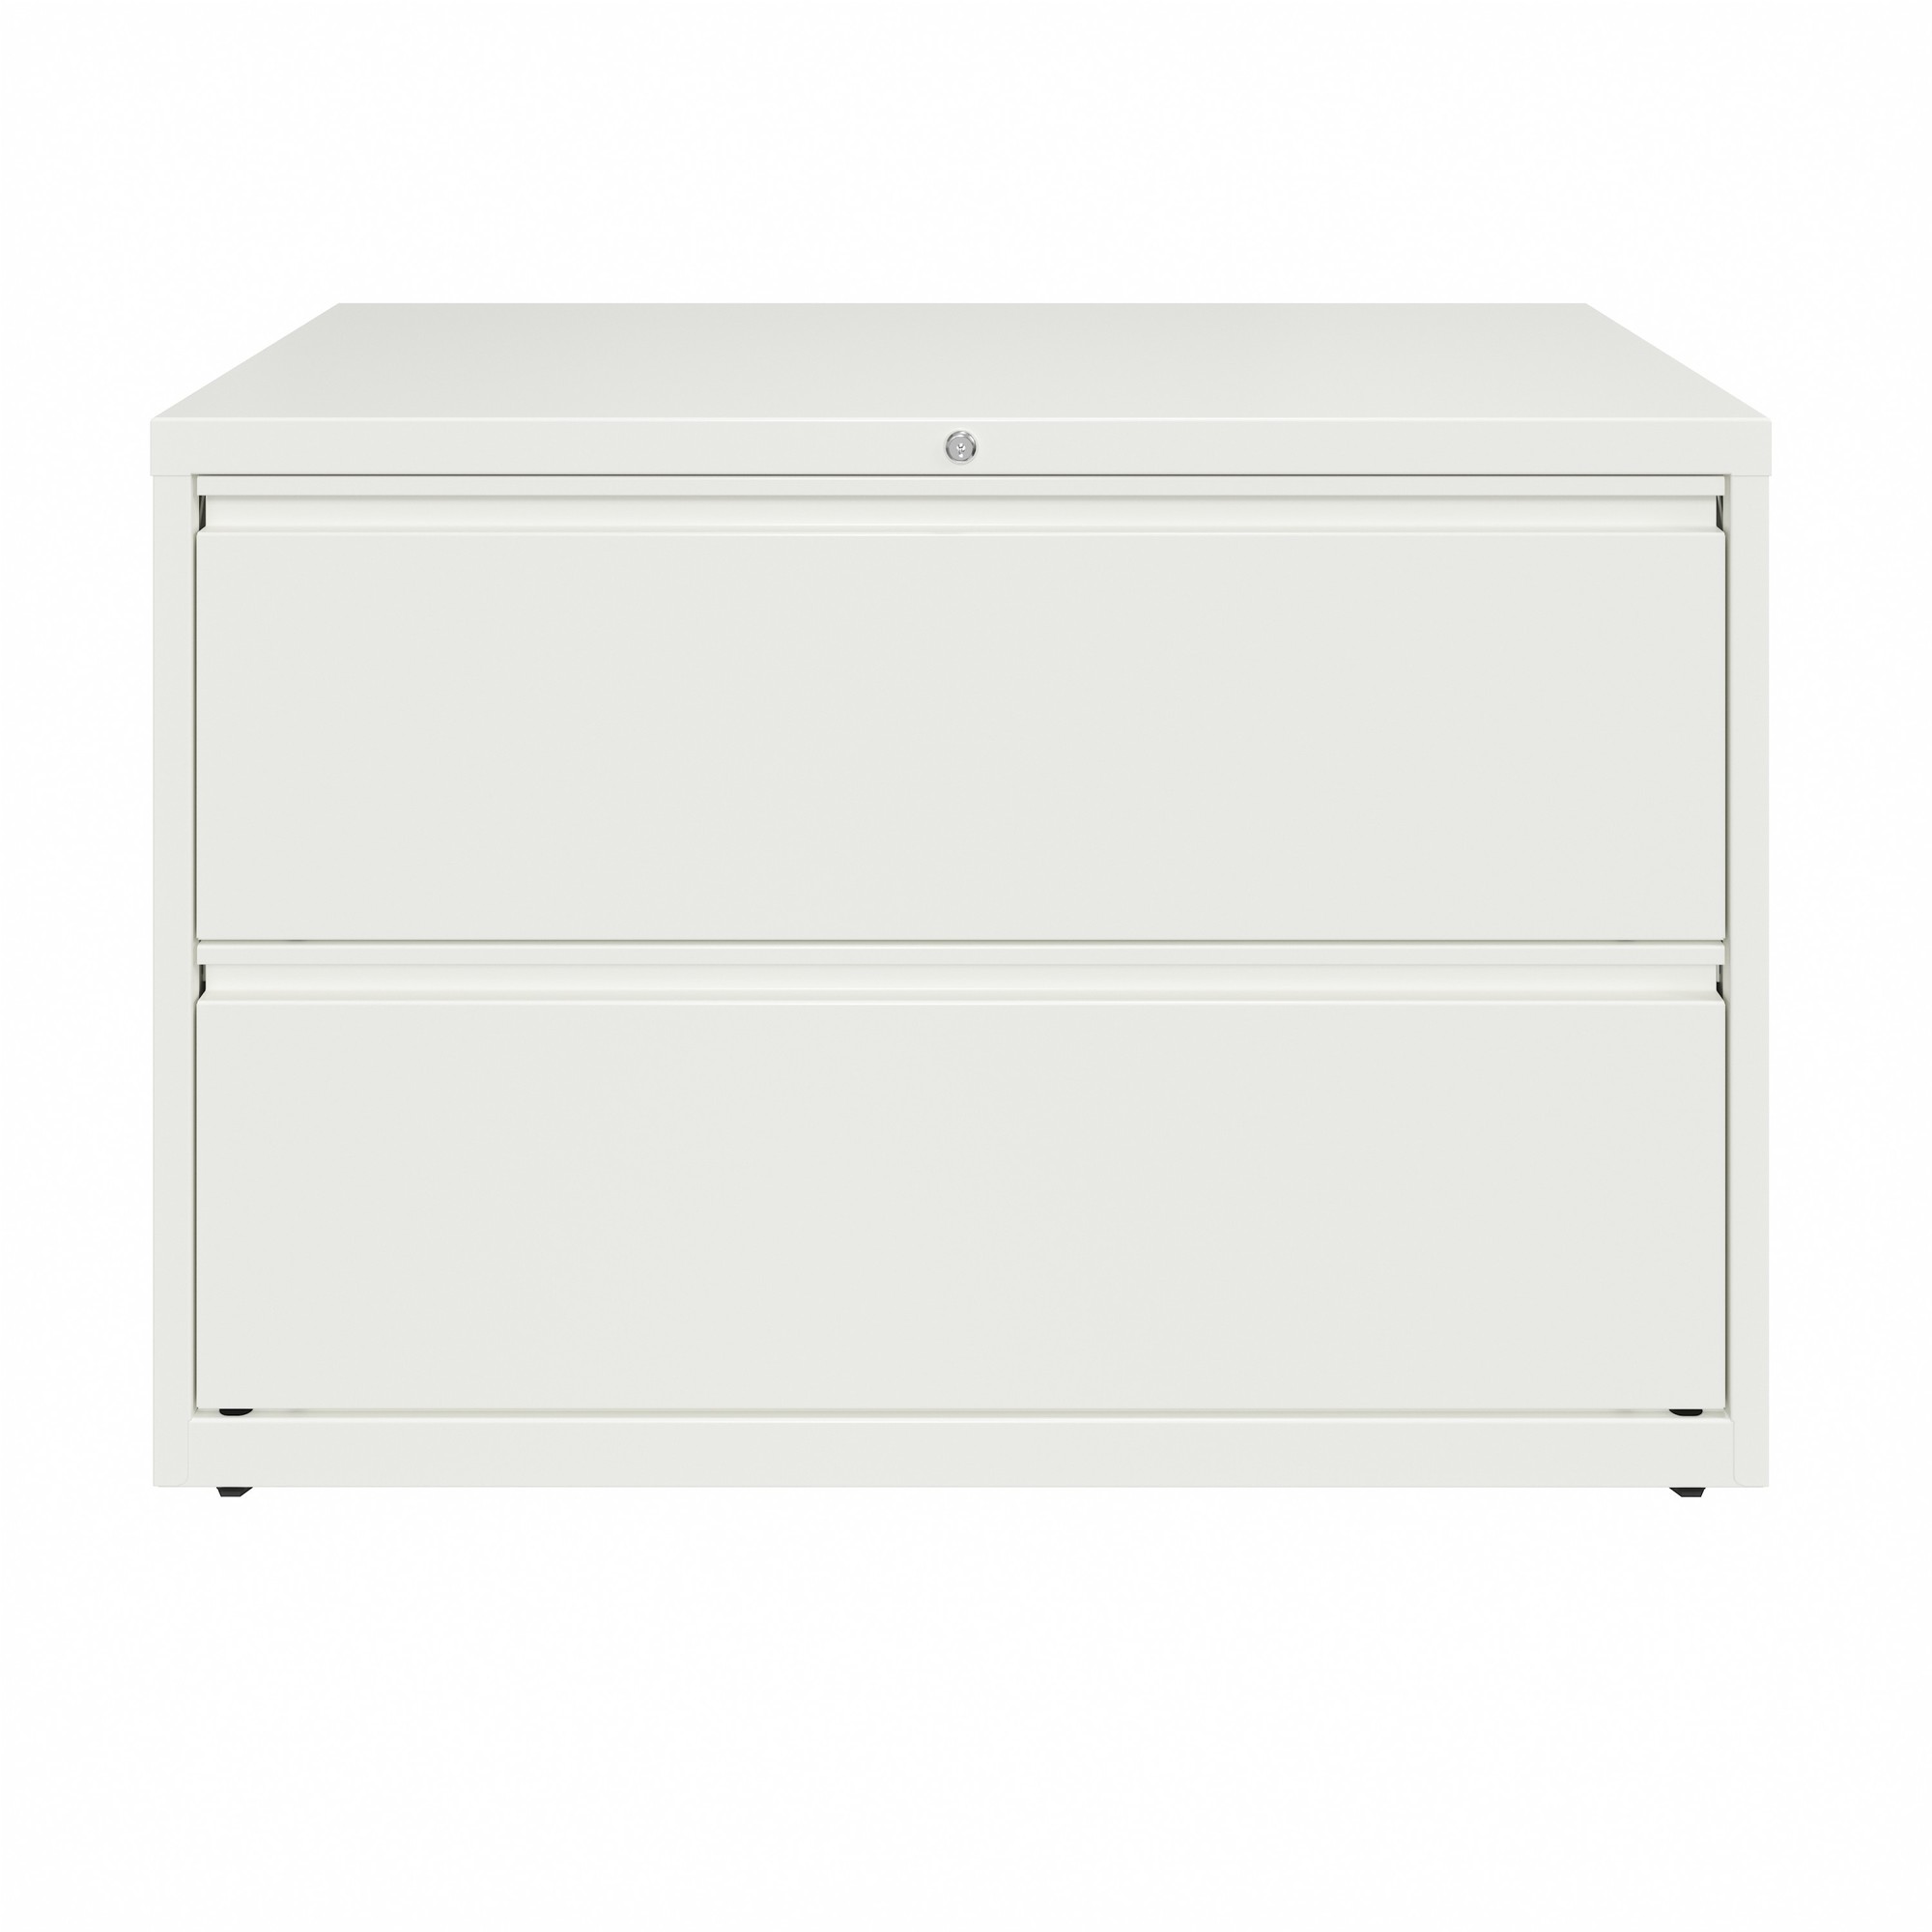 2 Drawer Lateral File Cabinet, Width 42 in, Depth 18.625 in, Height 28 in, Model - Hirsh Industries 23704